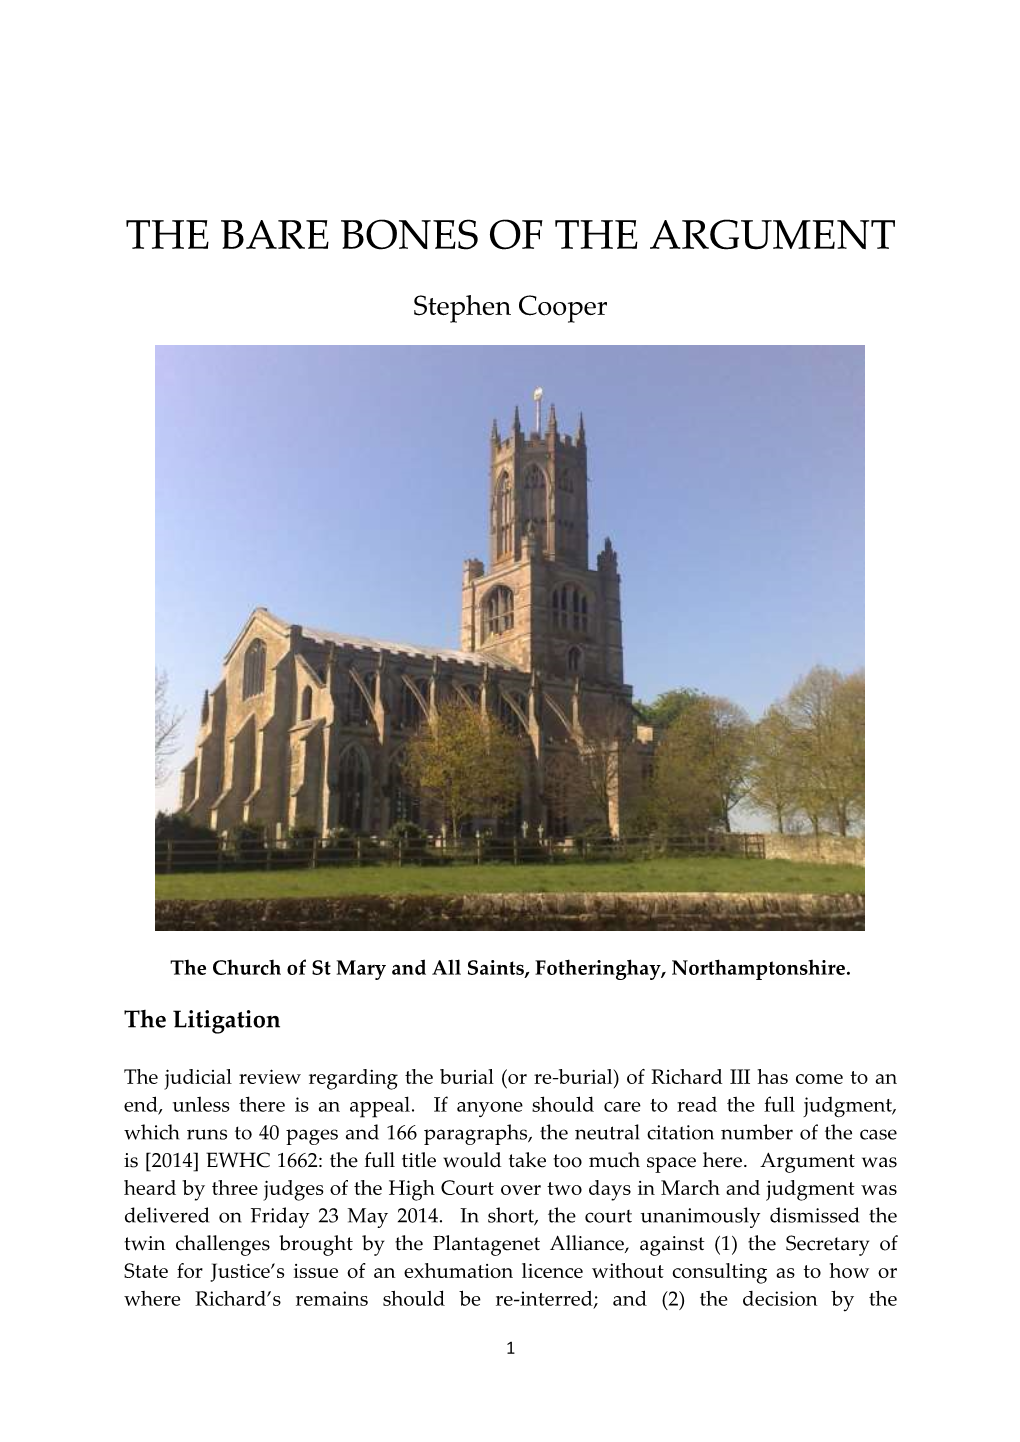 The Bare Bones of the Argument